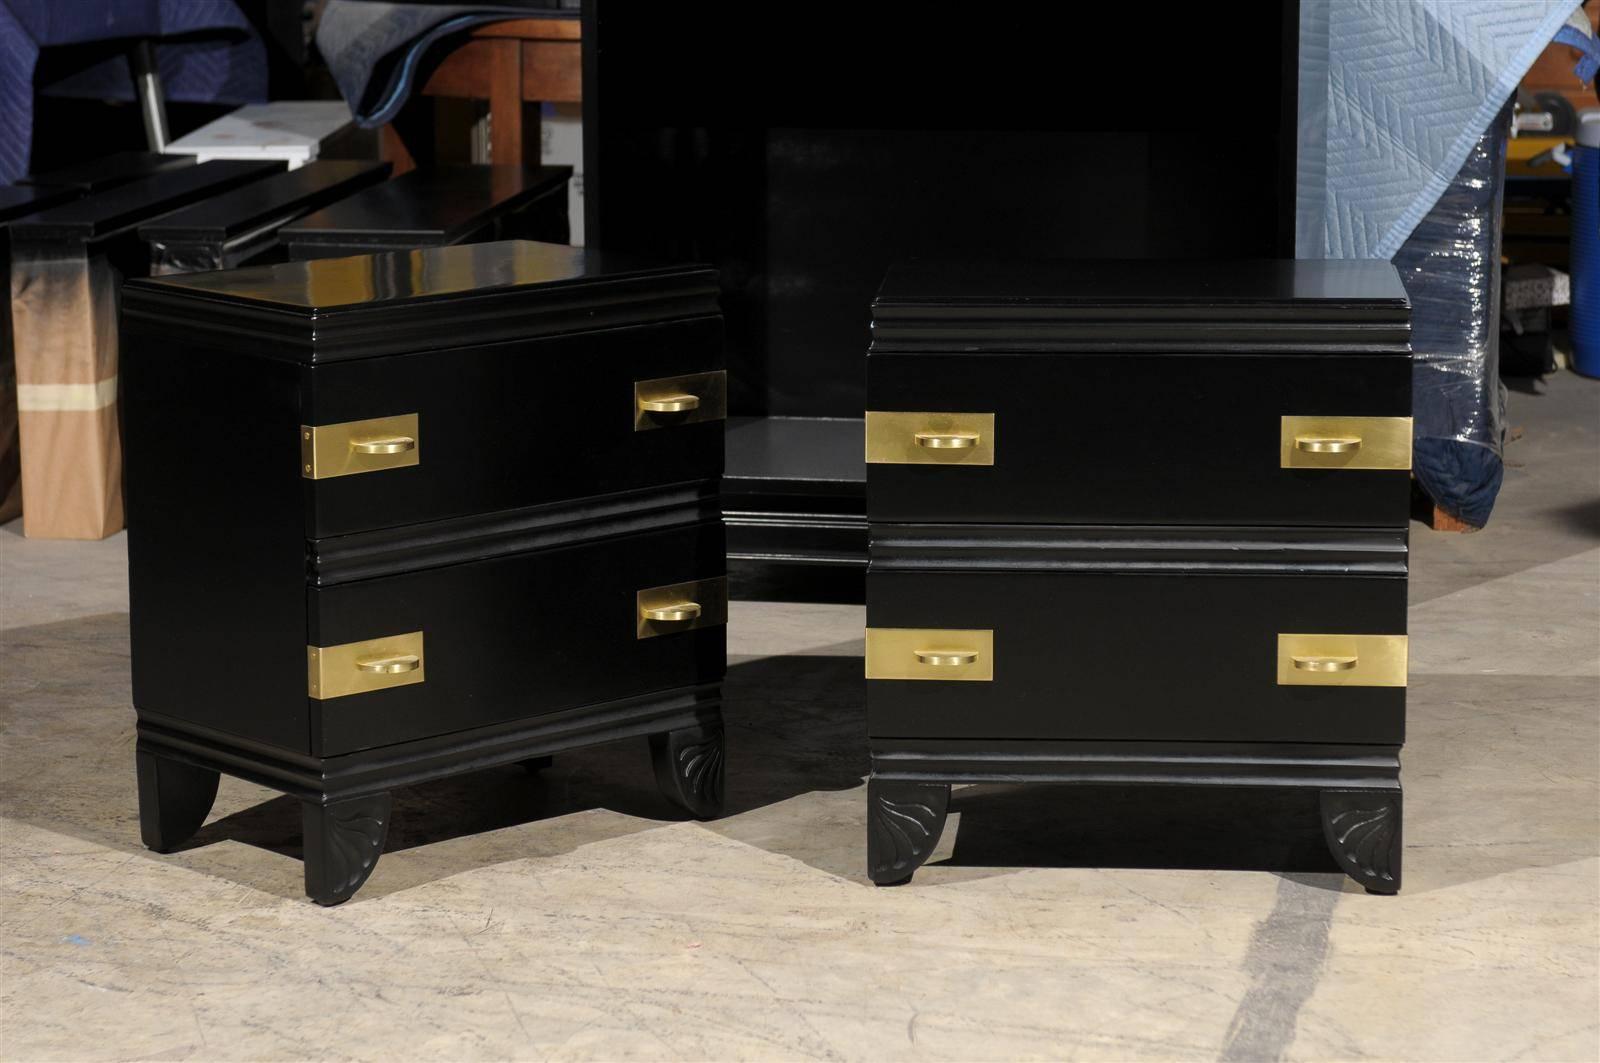 An exquisite pair of end tables or nightstands from a difficult to find case series (1110) by Widdicomb, introduced in 1938. Expertly crafted mahogany construction and restored in black lacquer. Stunning solid brass hardware marks the drawers.